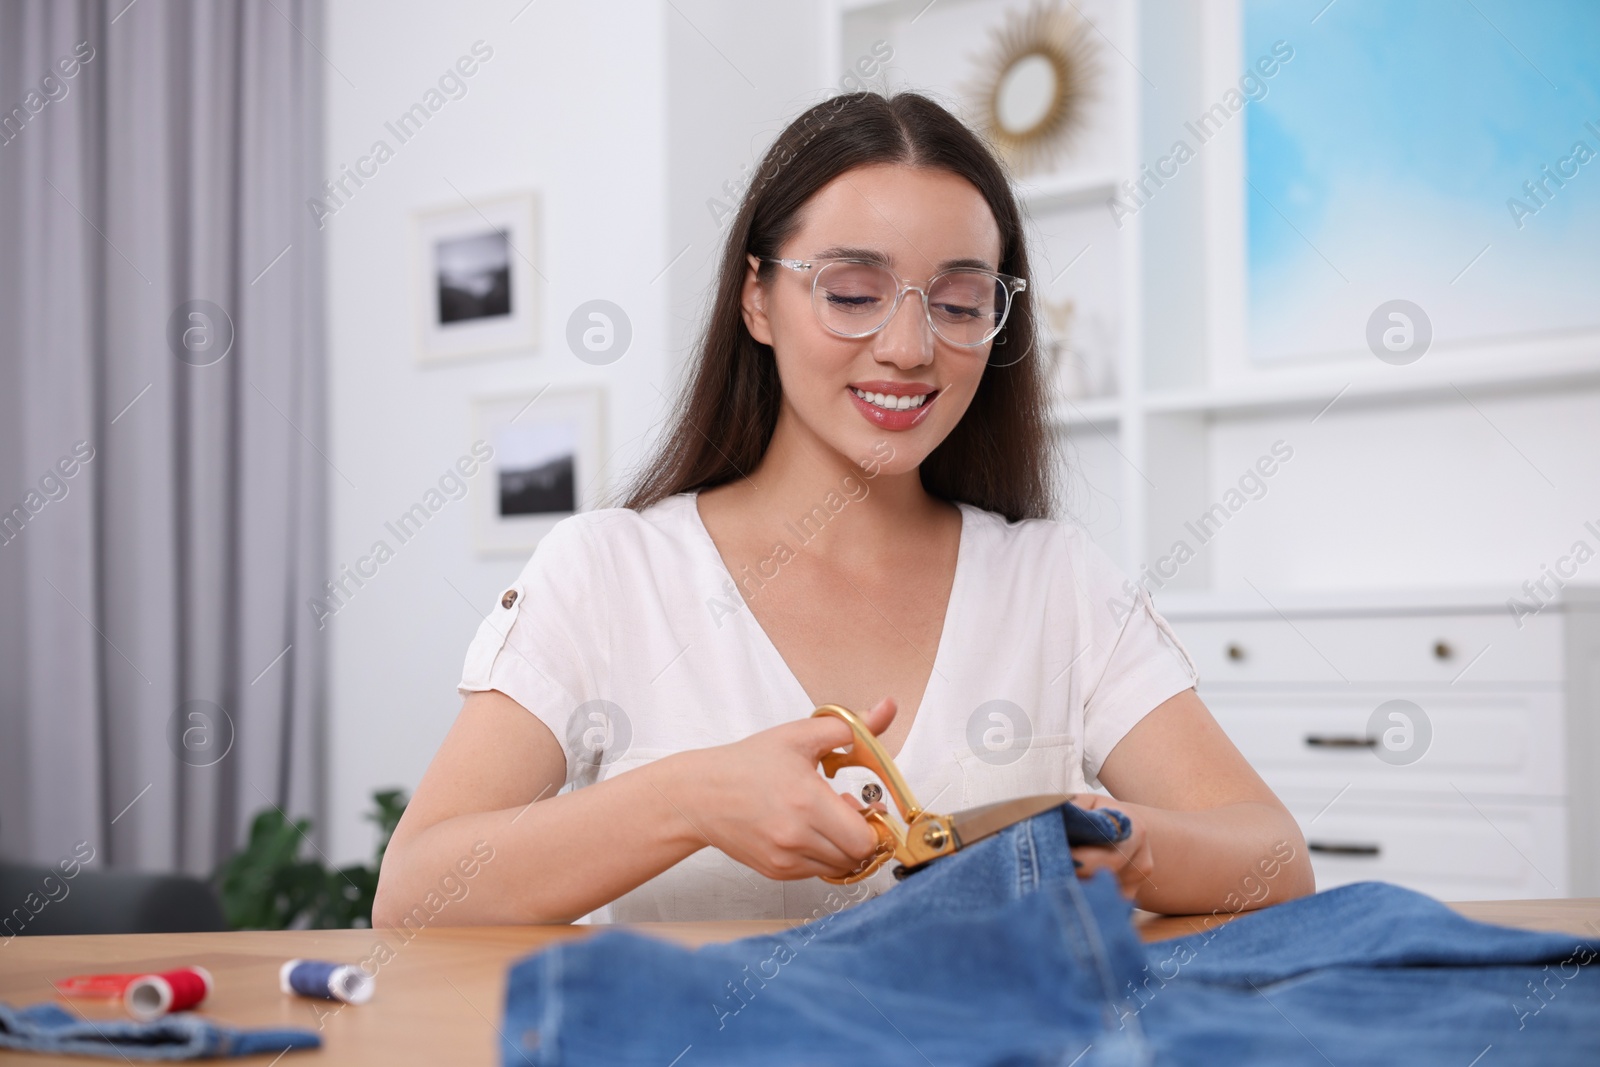 Photo of Happy woman cutting hem of jeans at table indoors